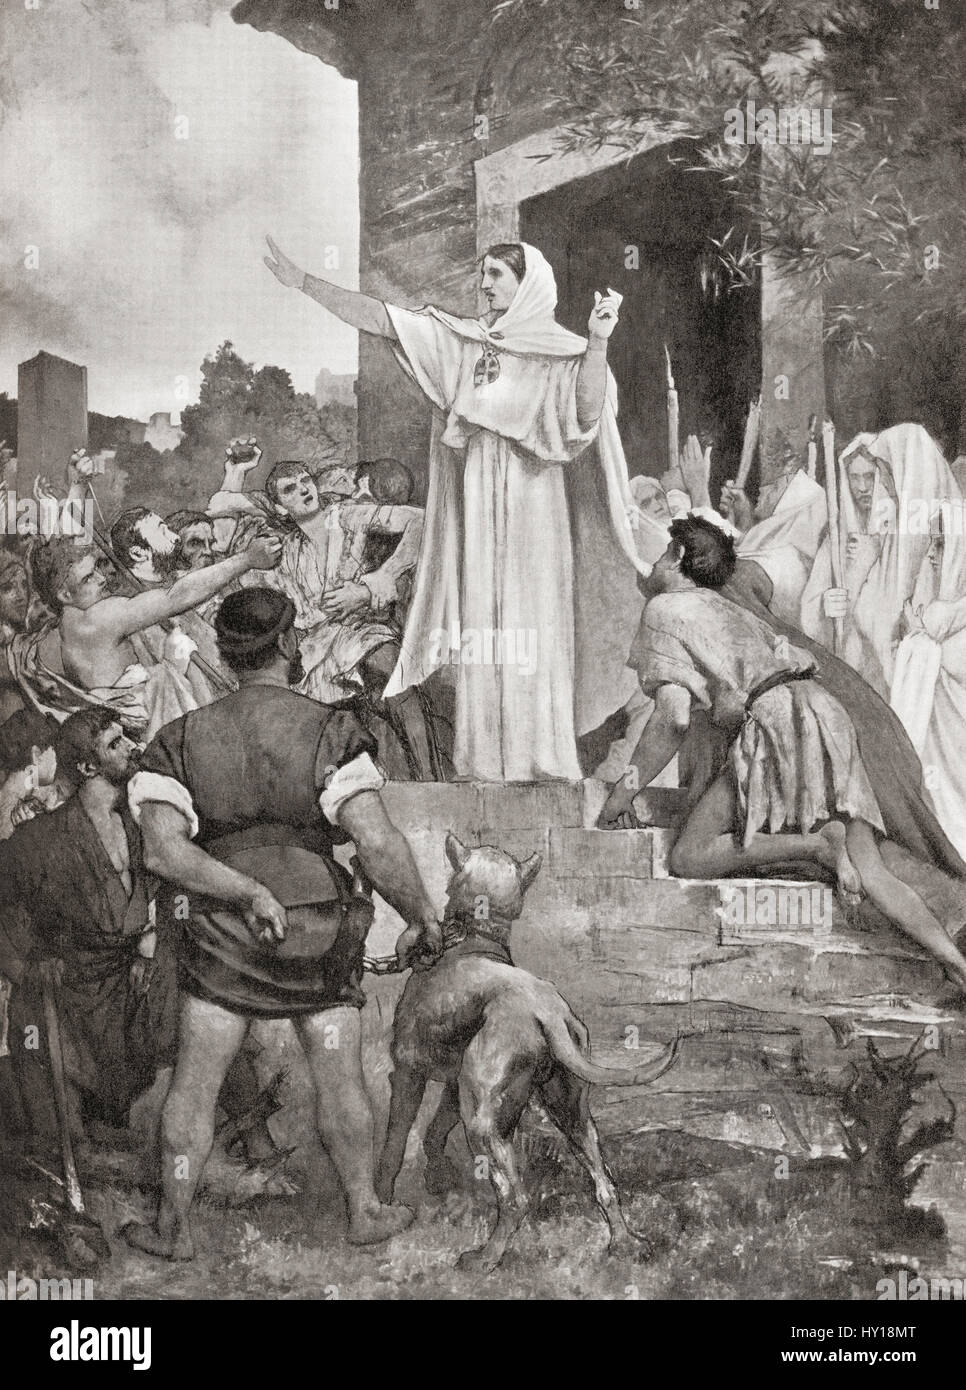 St. Genevieve calming the Parisians on the approach of Attila the Hun, 451AD.  From Hutchinson's History of the Nations, published 1915. Stock Photo